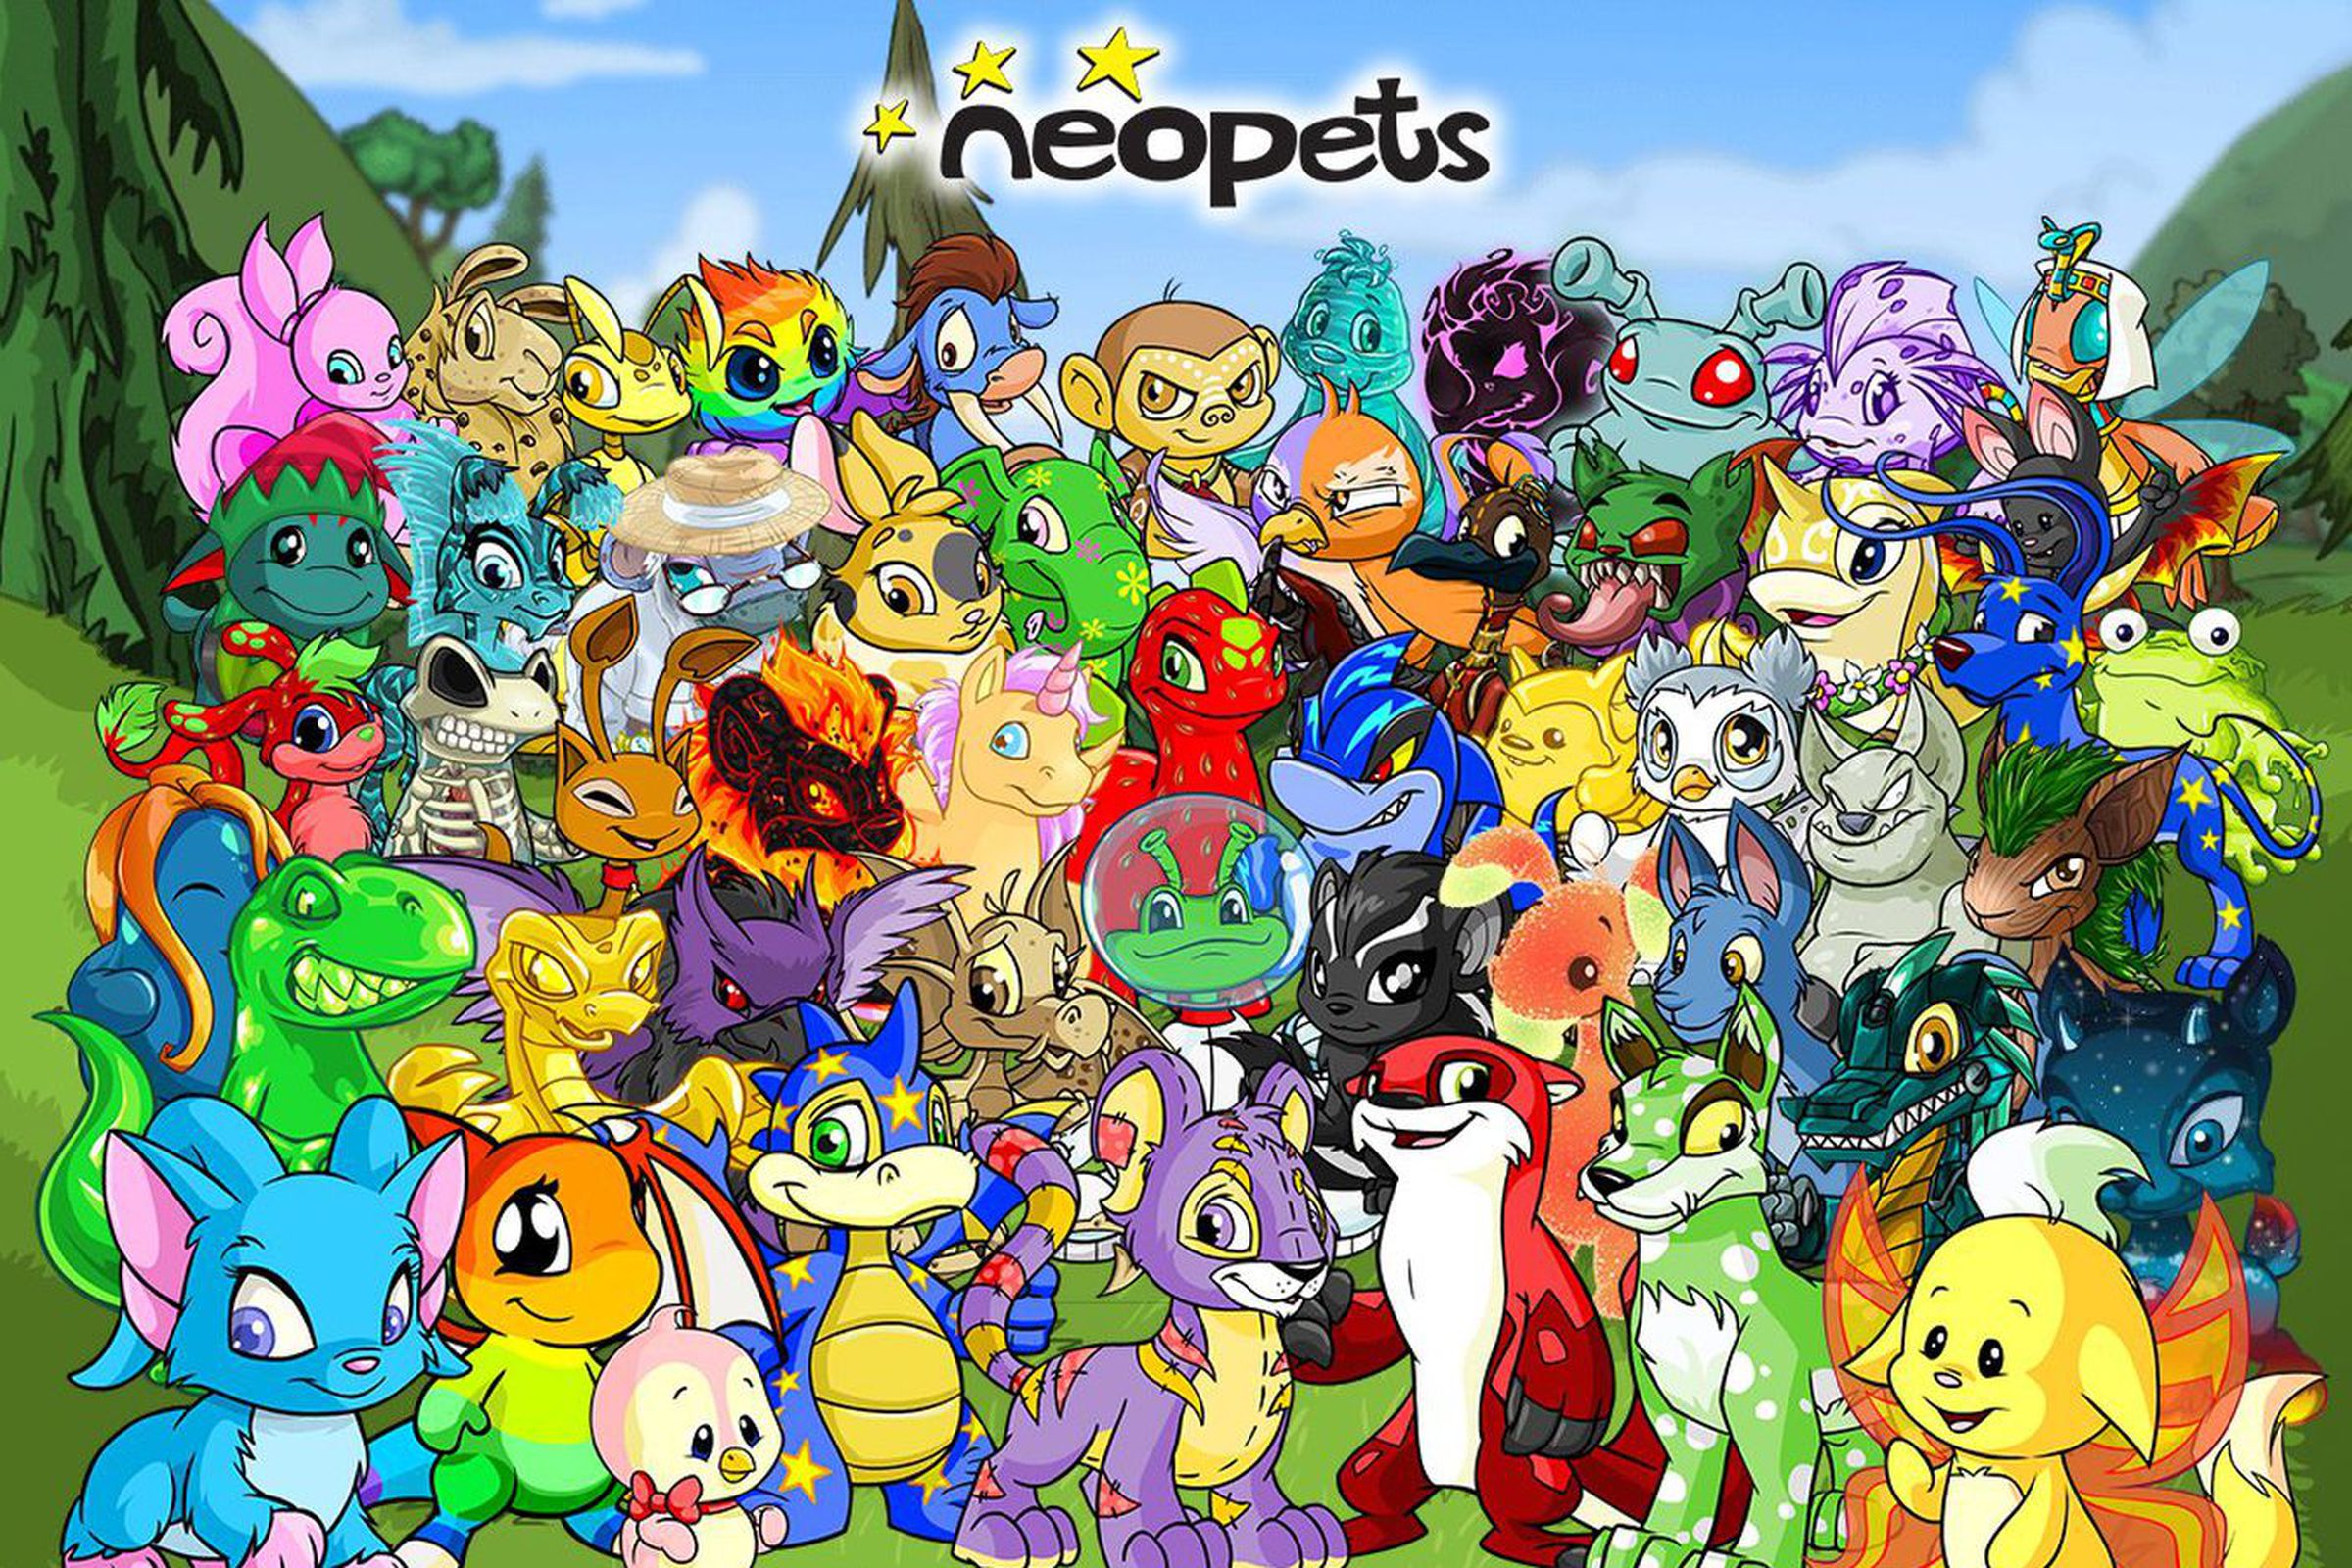 Neopets was a hugely popular virtual pet adoption site launched in 1999. 